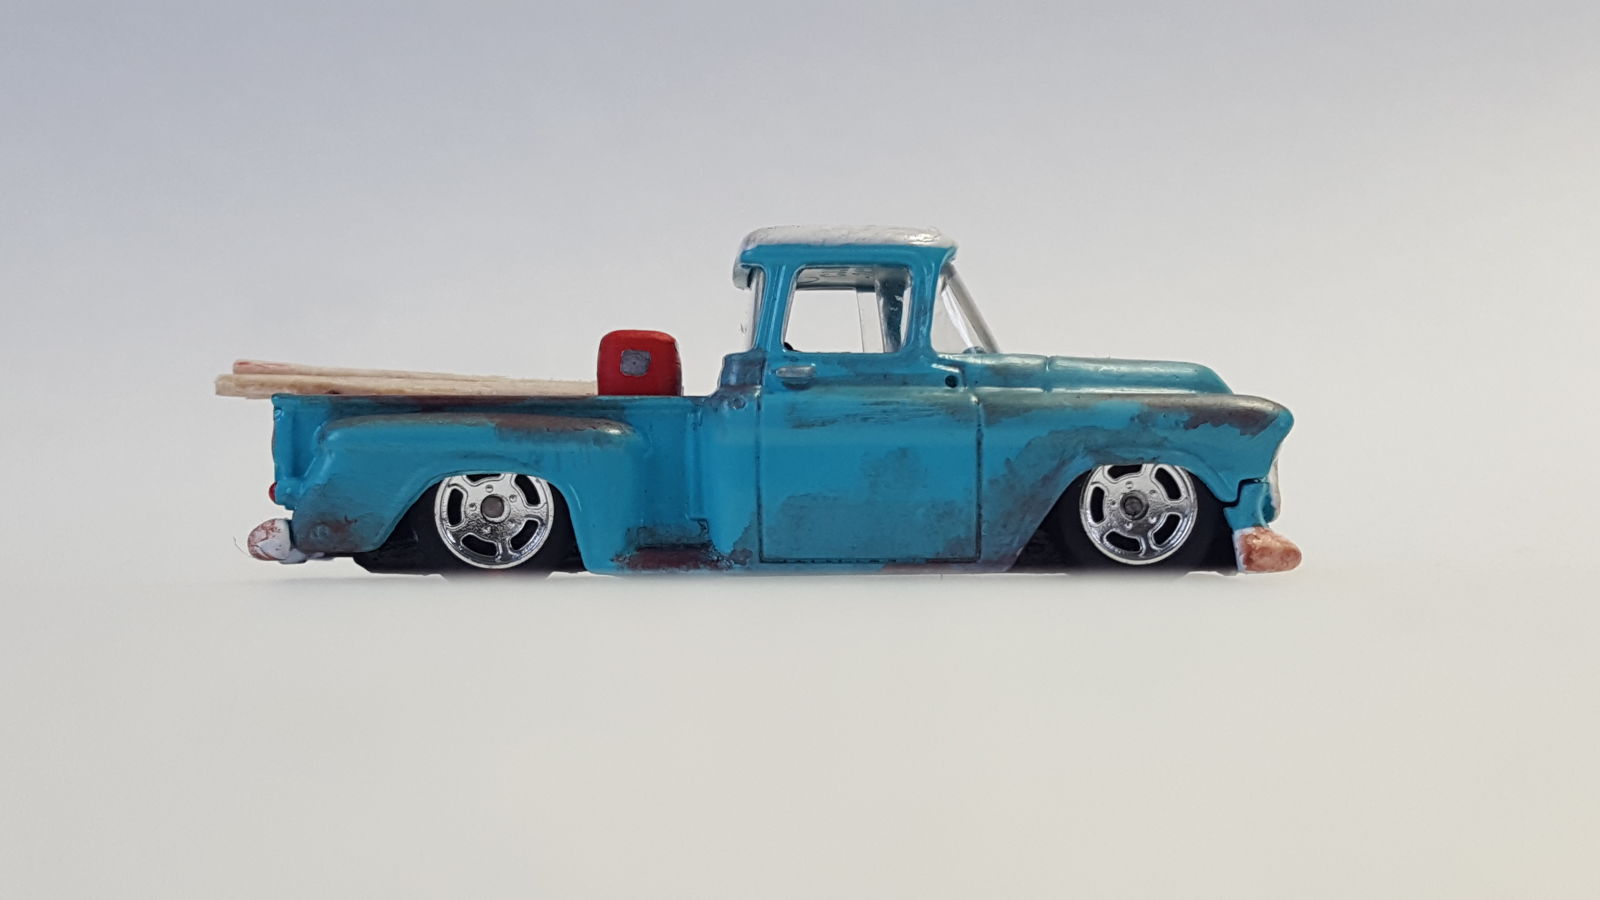 Illustration for article titled Came out of retirement and did a custom thing! 1956 GMC turned Chevy Apache!